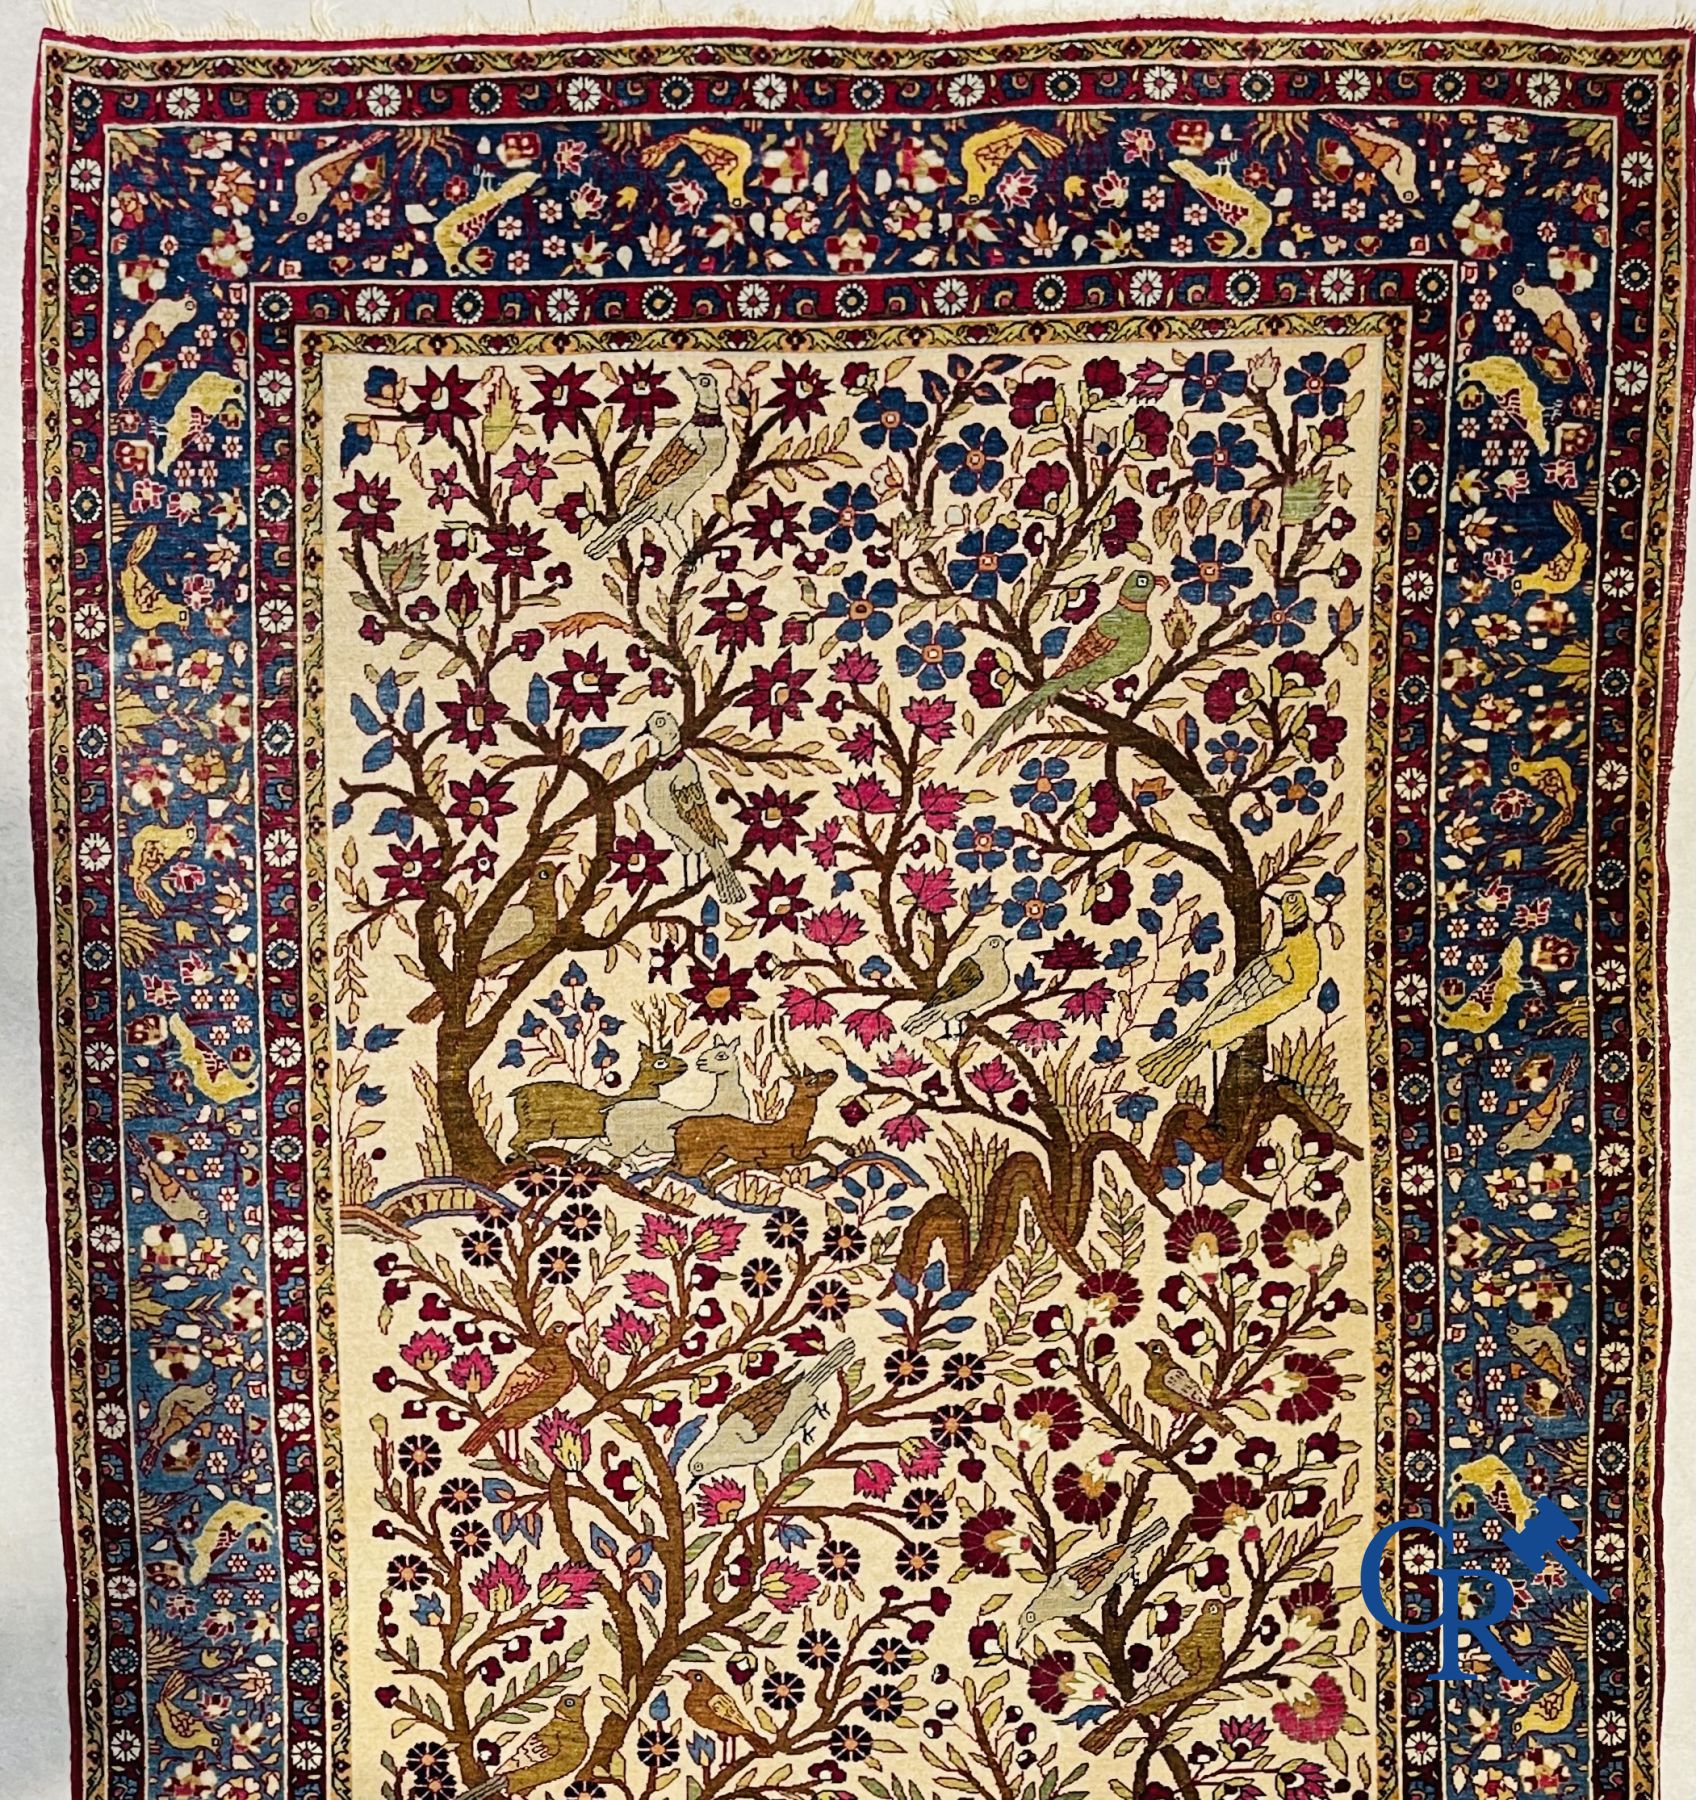 Oriental carpets: Antique oriental carpet with a decor of animals and birds in the forest. - Image 3 of 10